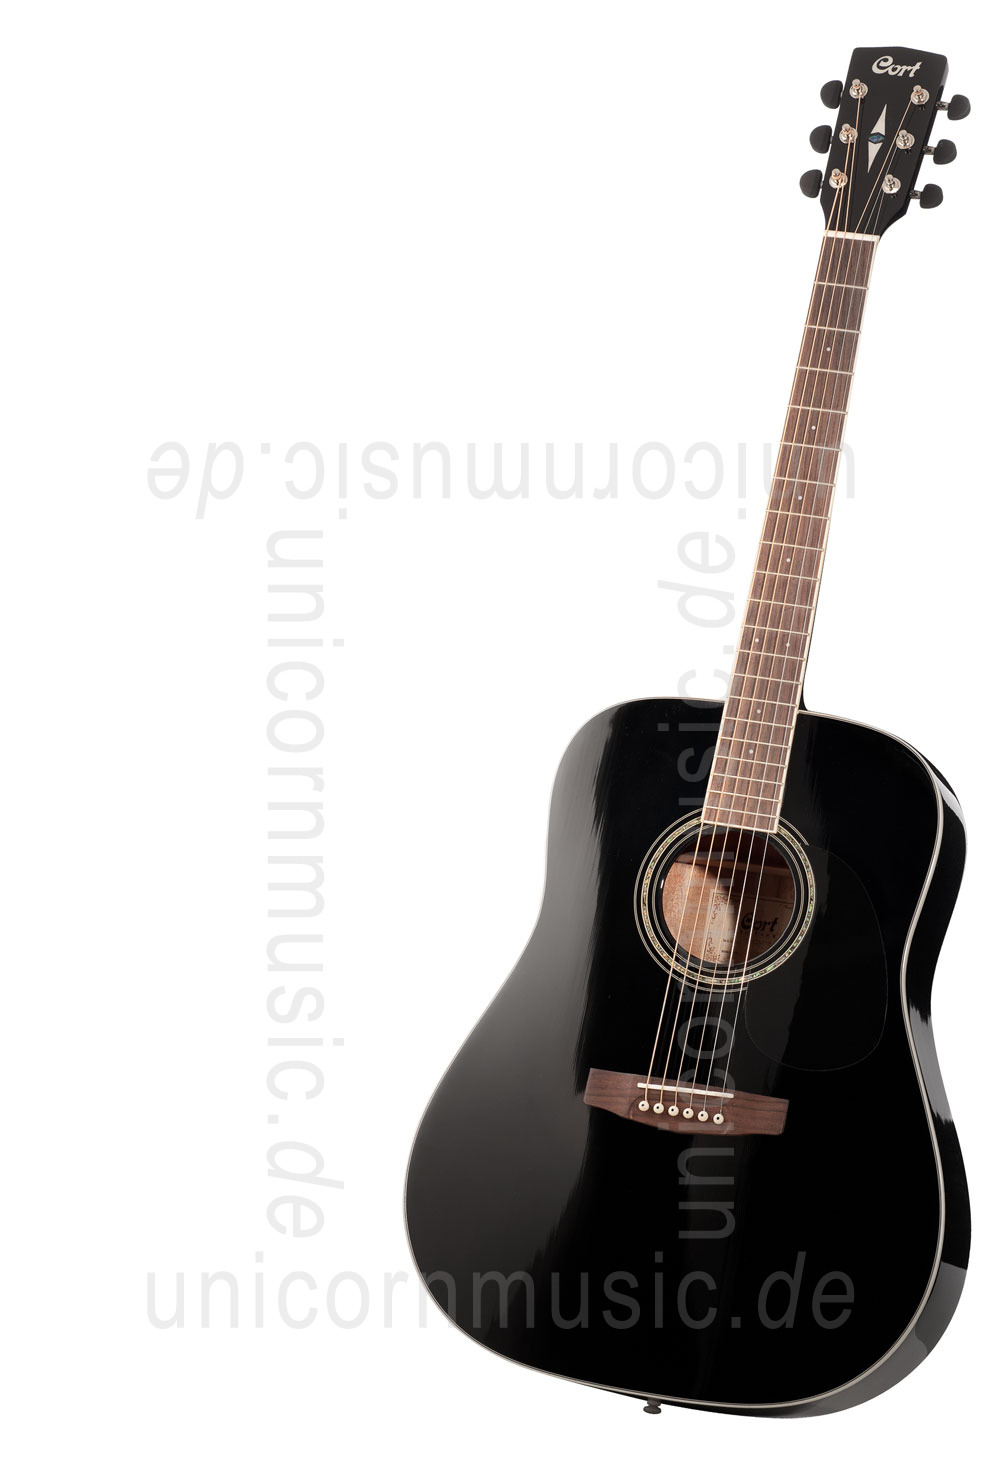 to article description / price Acoustic Guitar CORT EARTH 100 BK - Dreadnought - solid spruce top